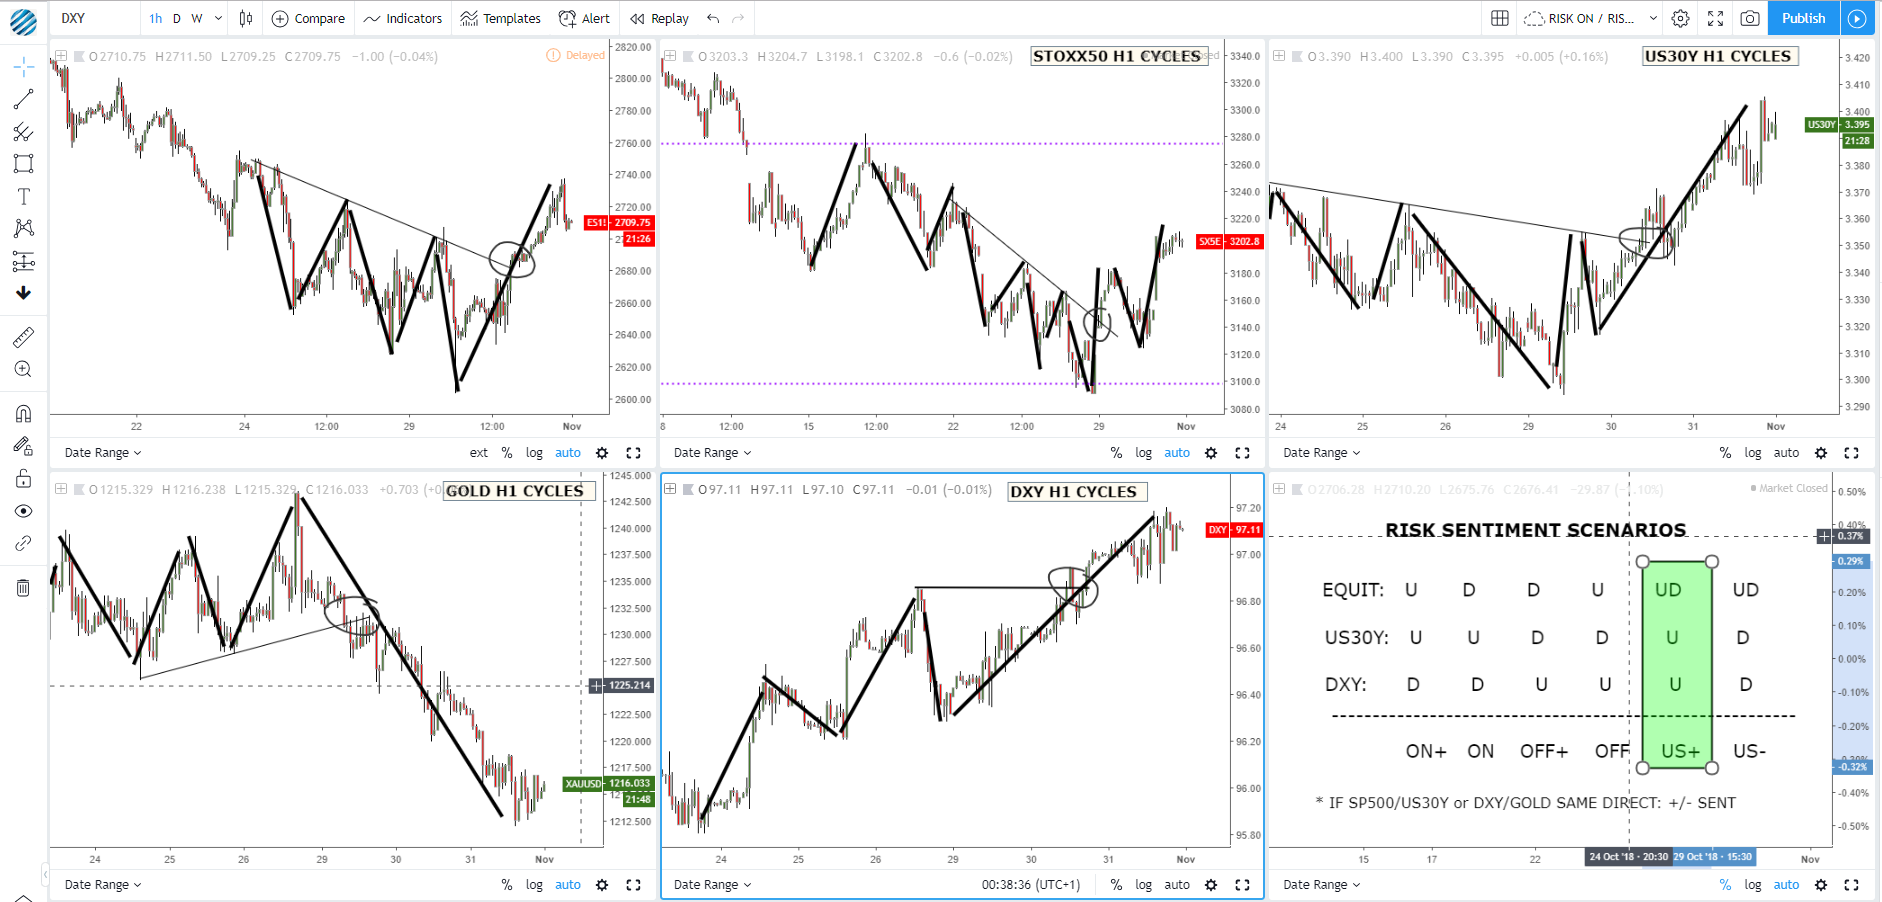 DXY And Equities Move Up